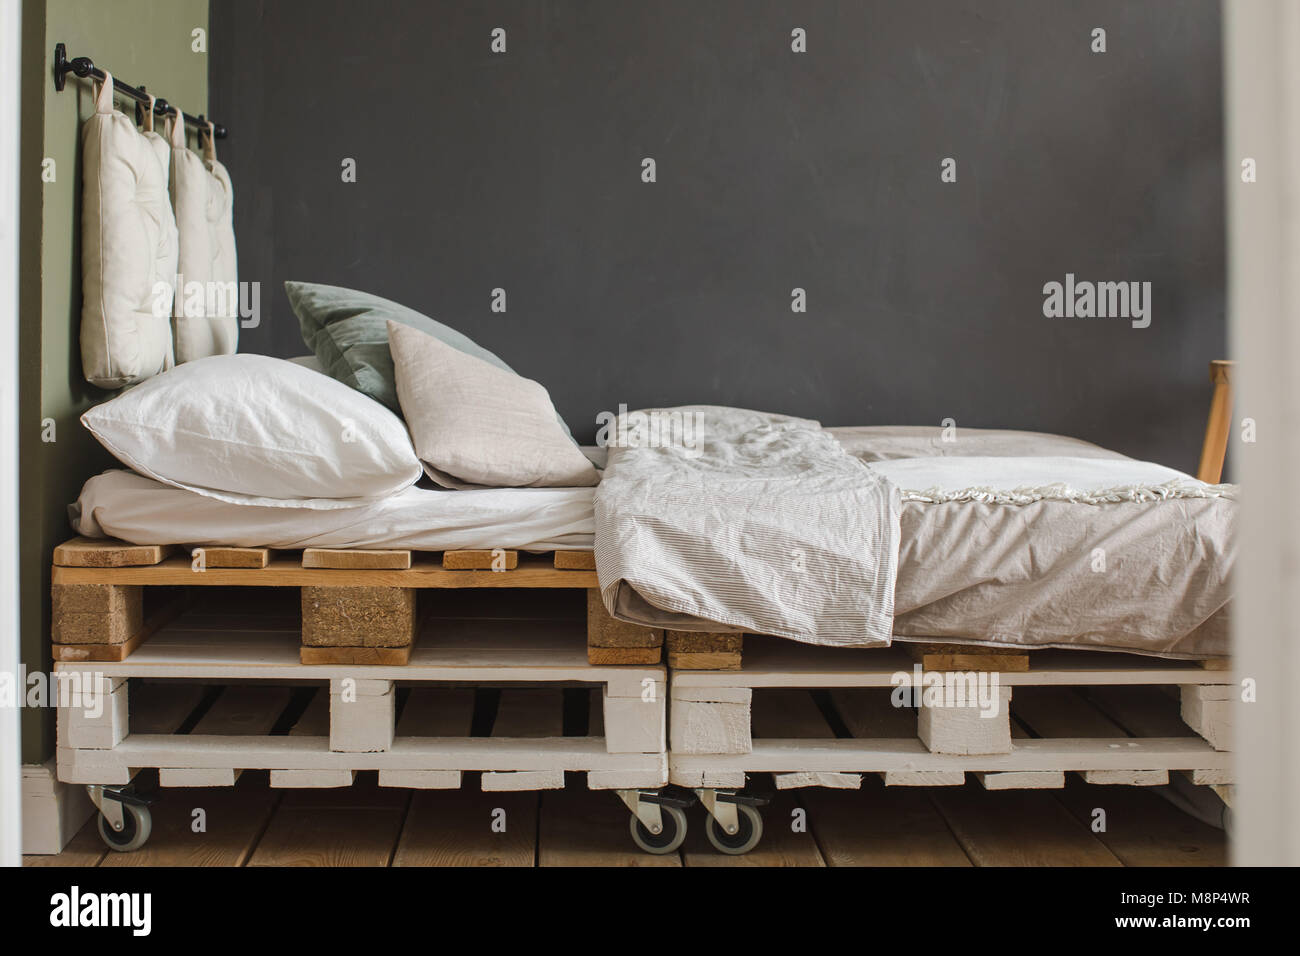 Industrial style bedroom recycled pallet bed frame Stock Photo